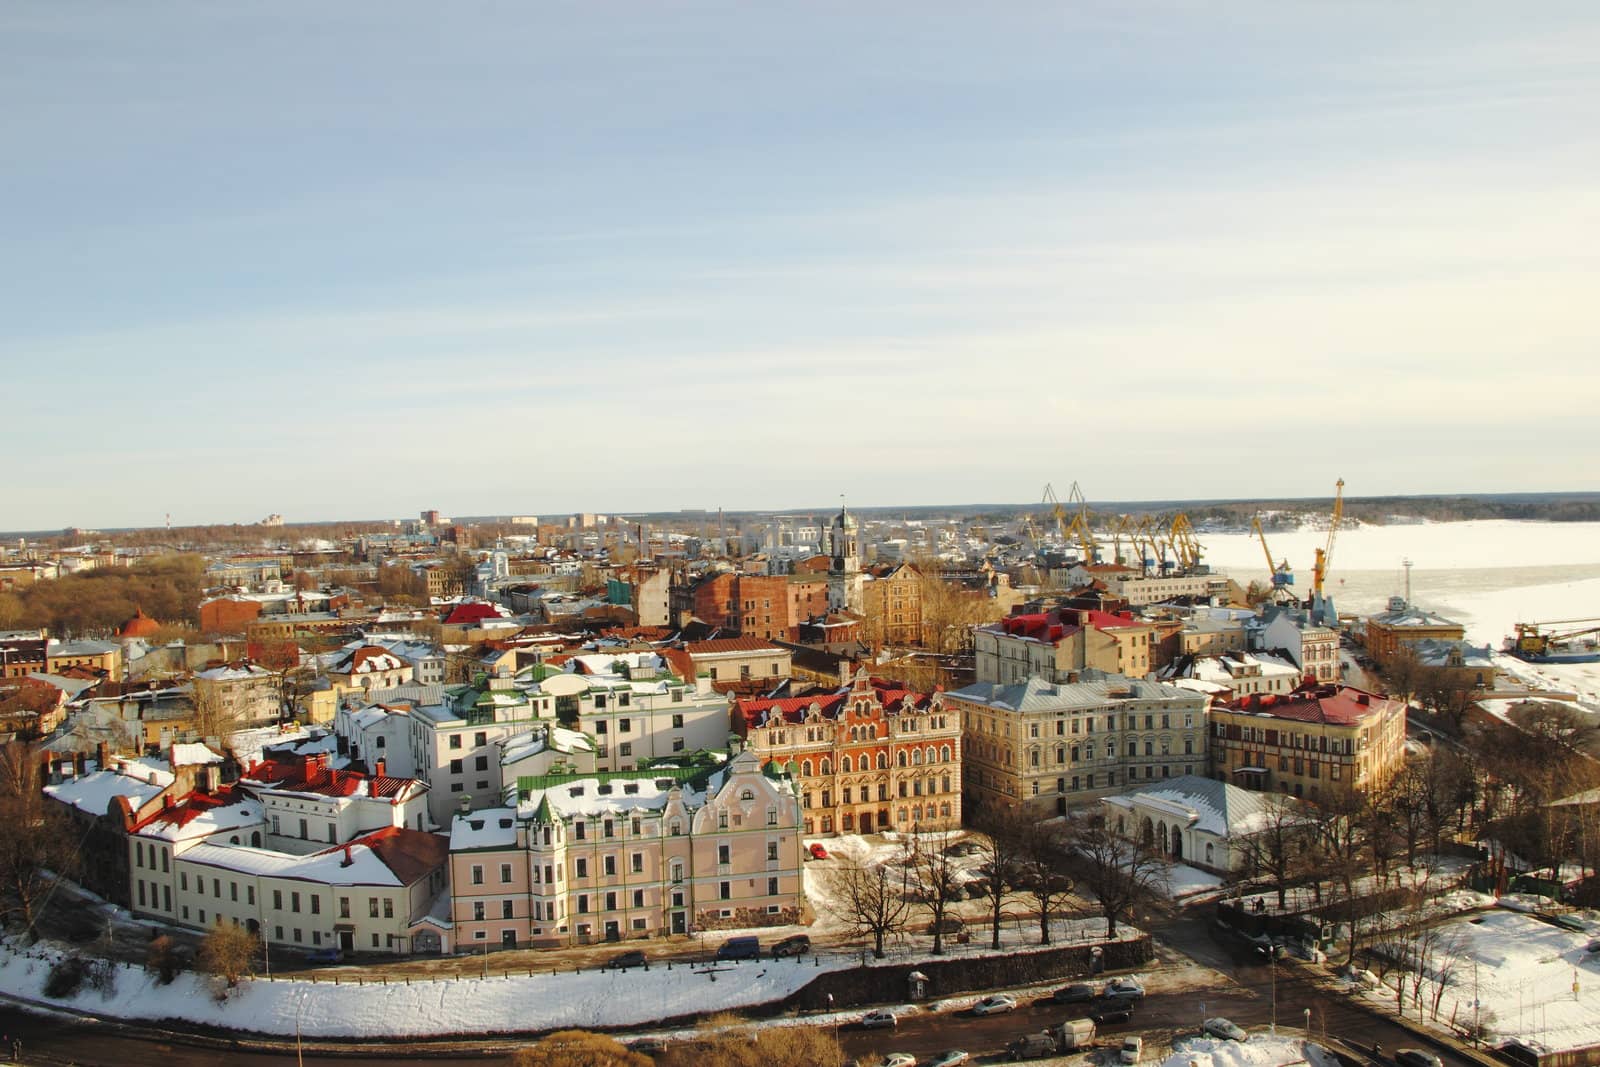 Winter view from the height of the tower Vyborg.